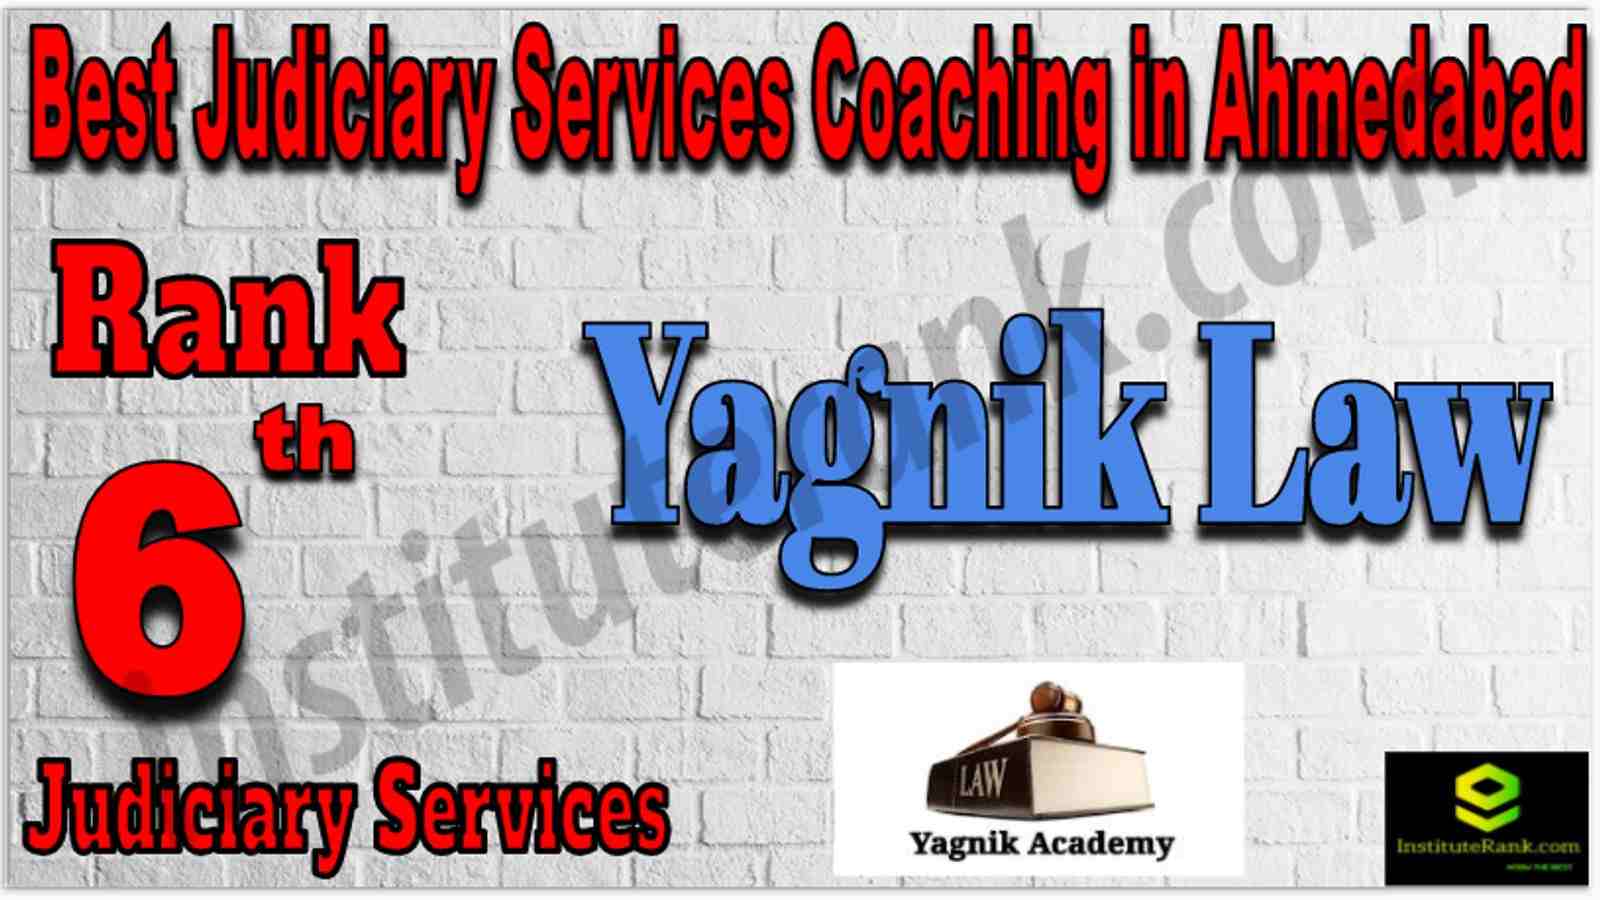 Rank 6 Best Judiciary Services Coaching in Ahmedabad